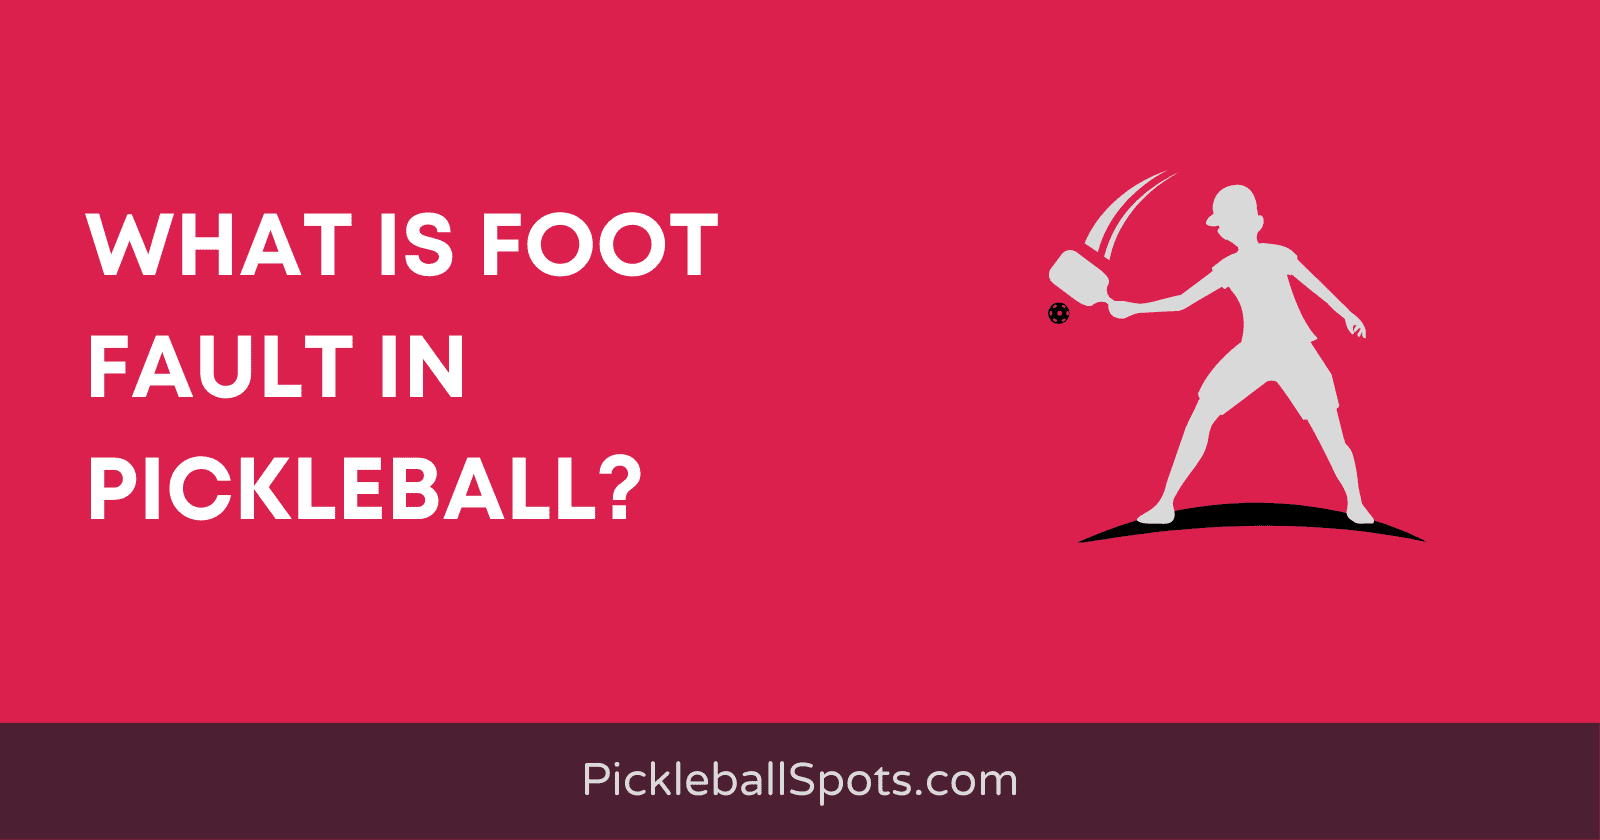 What Is Foot Fault In Pickleball